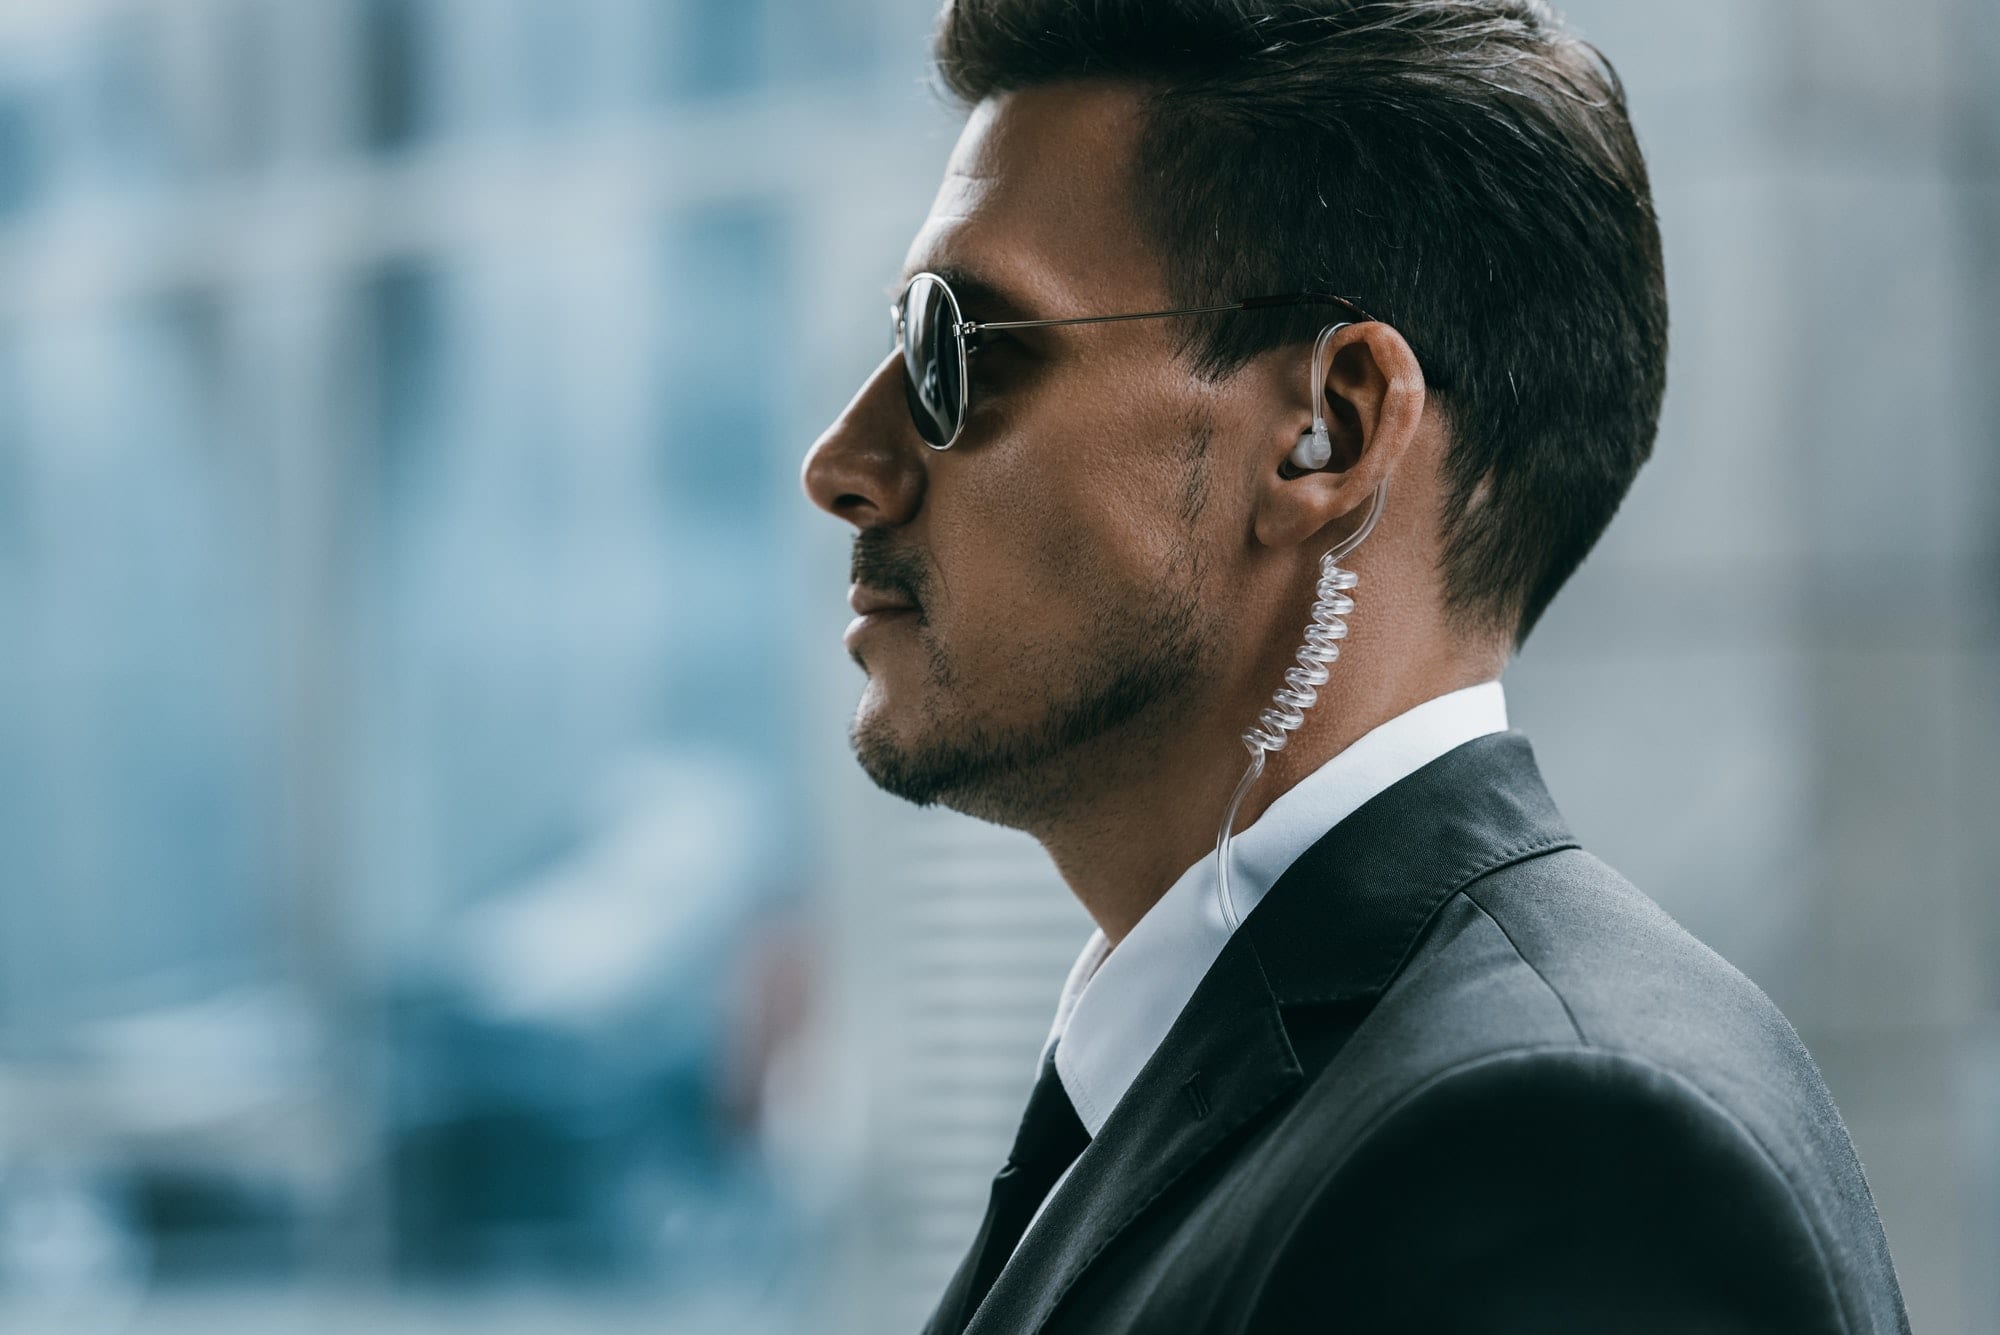 profile of handsome security guard with sunglasses and security earpiece